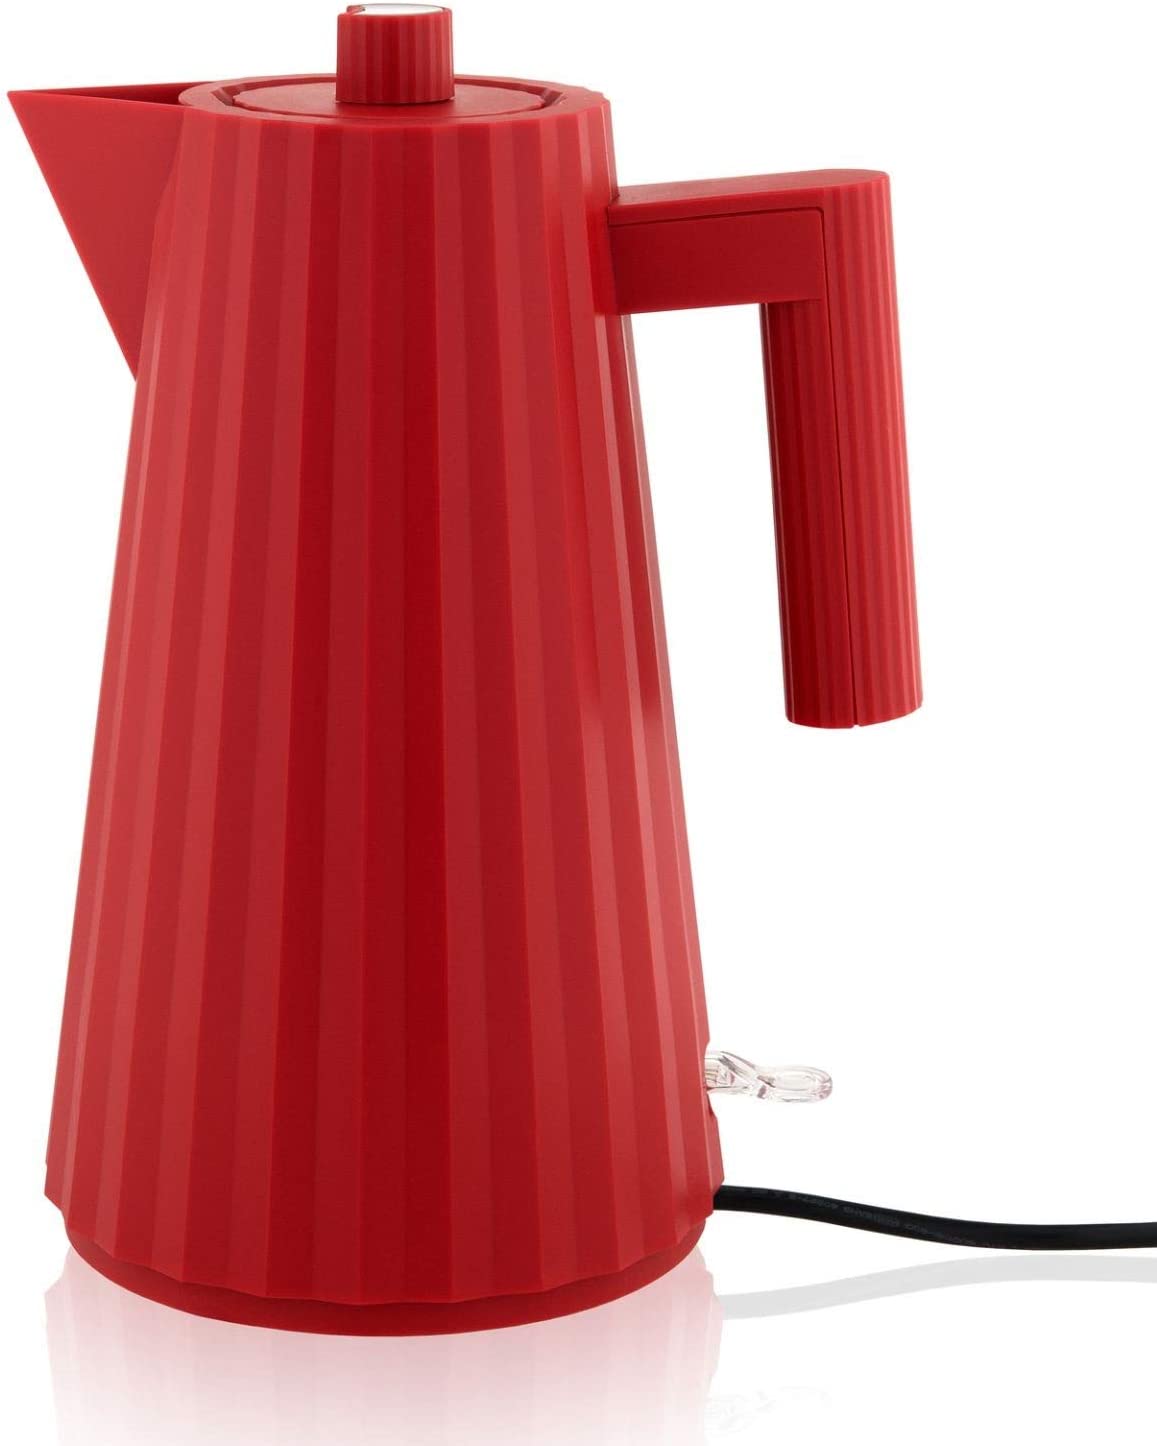 Alessi MDL06R/USA Plissé Electric Kettle - Red